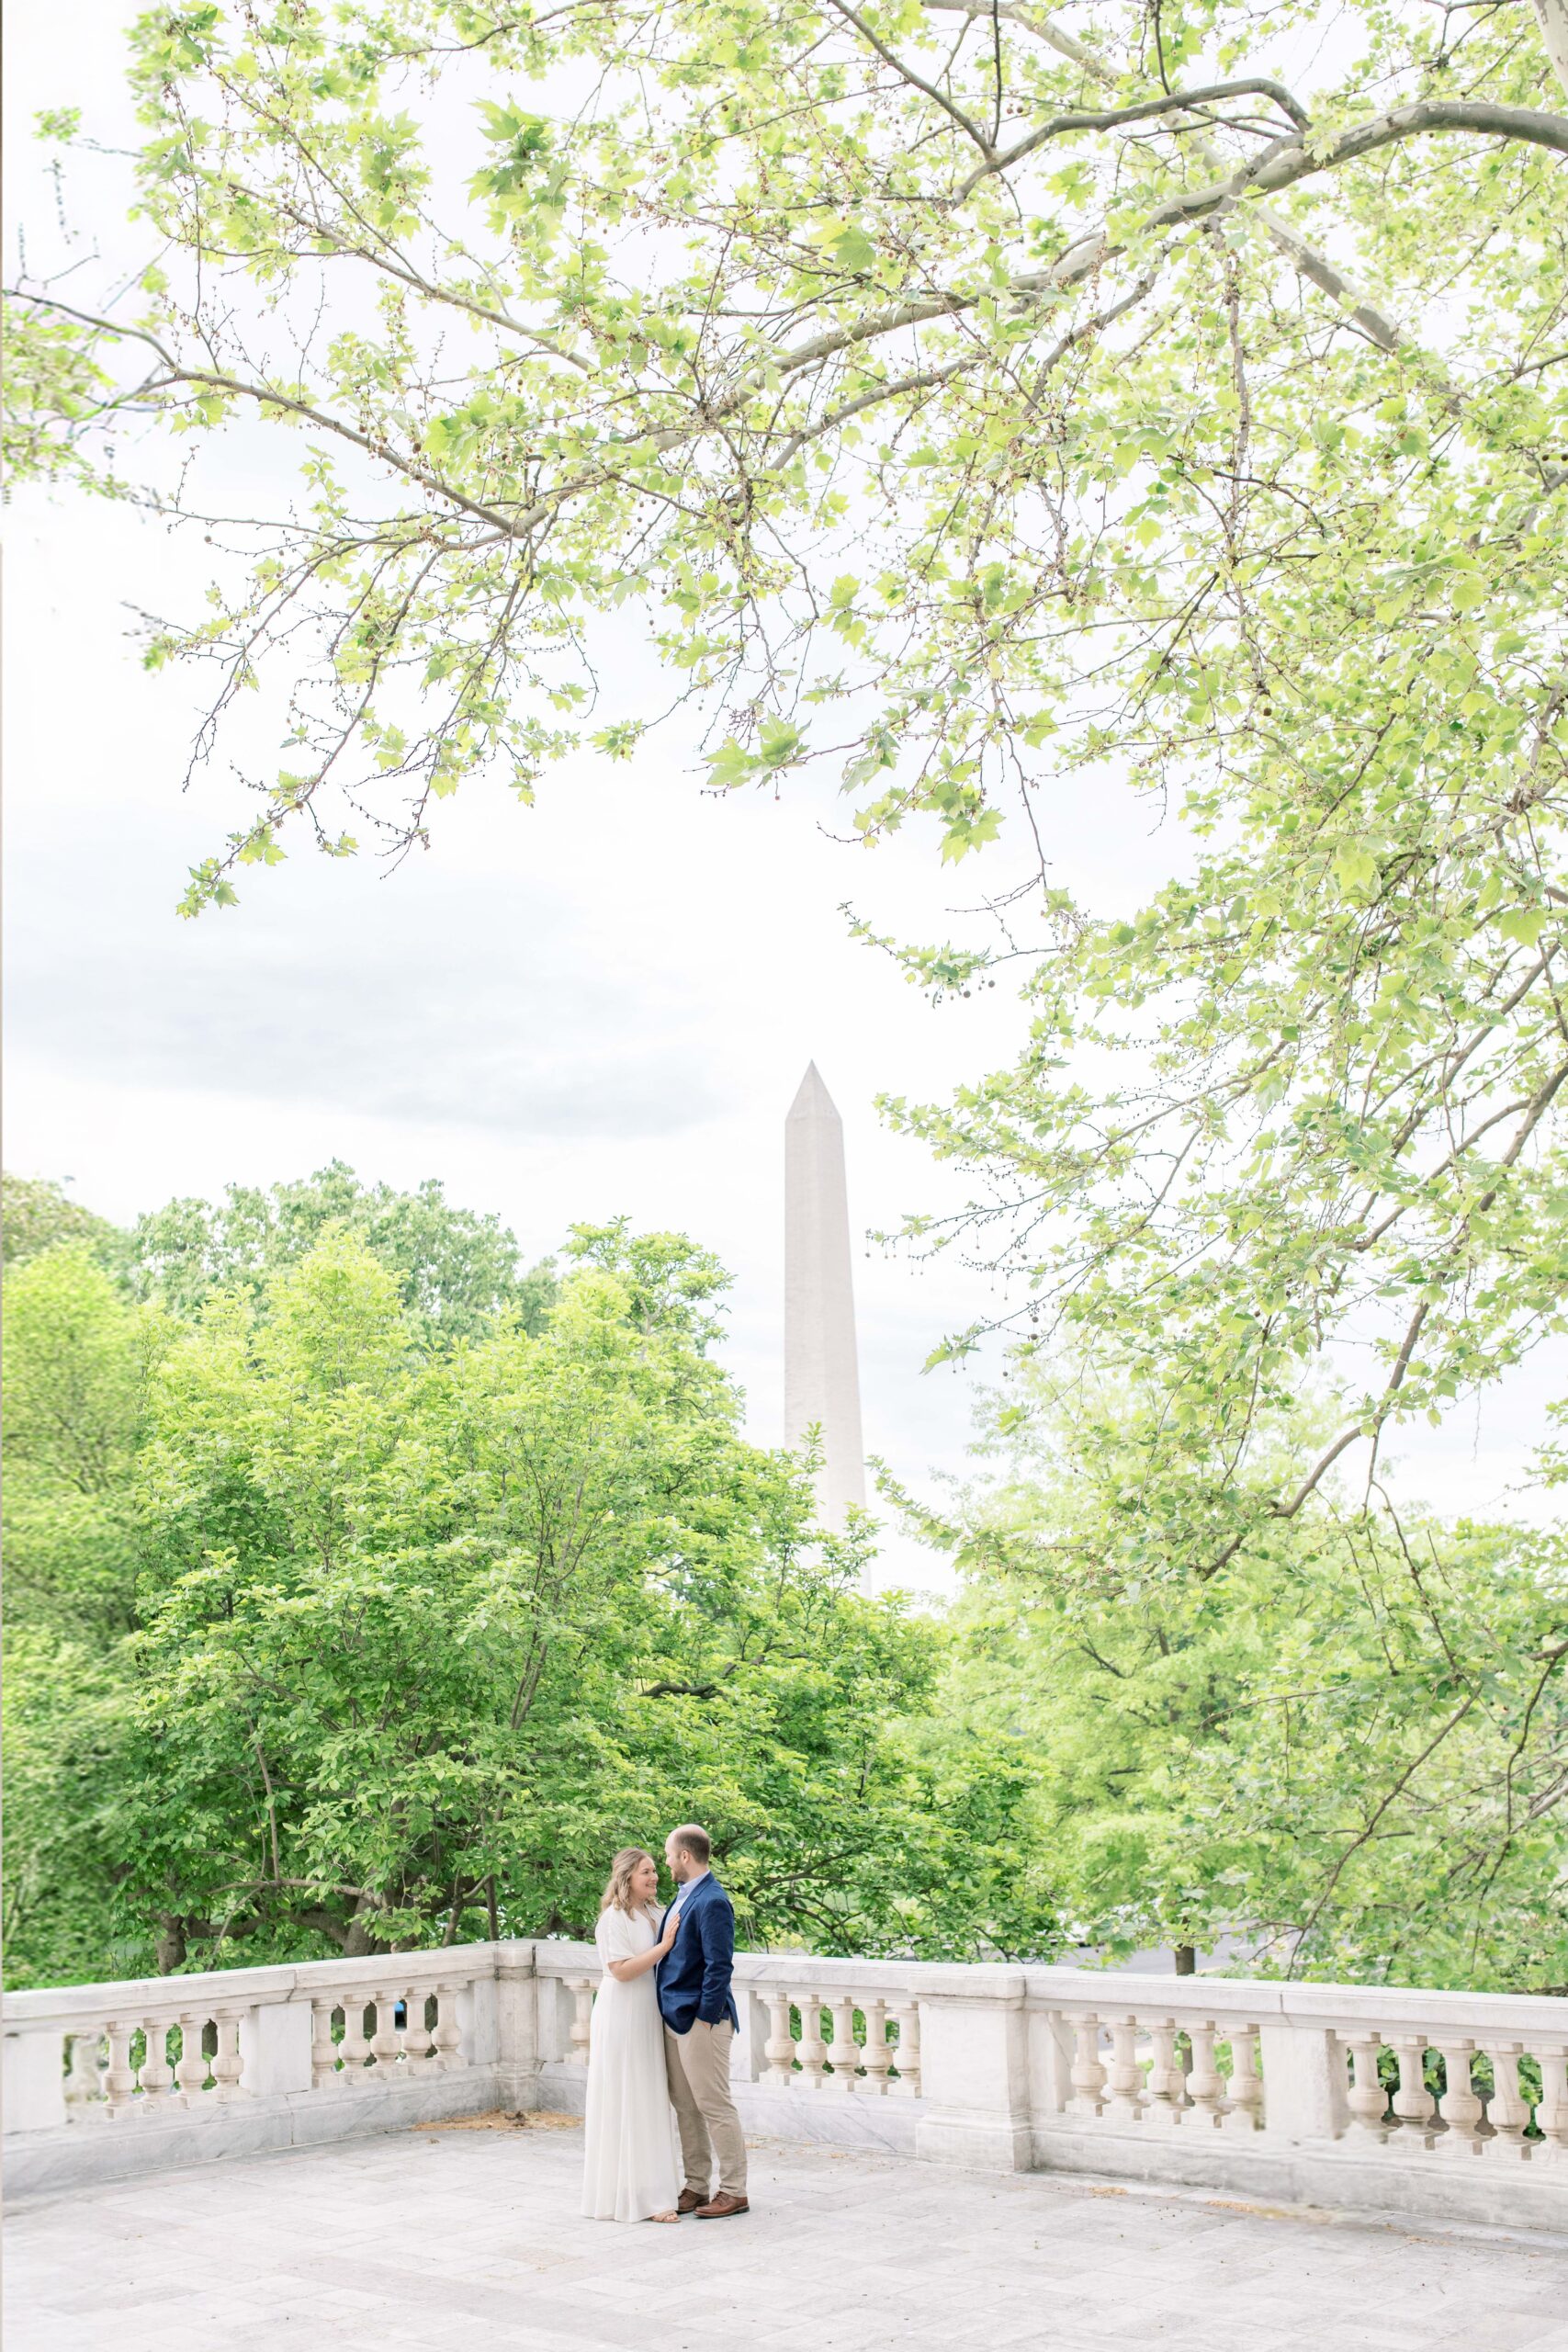 A romantic sunrise engagement session at DAR Constitution Hall and the Constitution Gardens in Washington, DC.